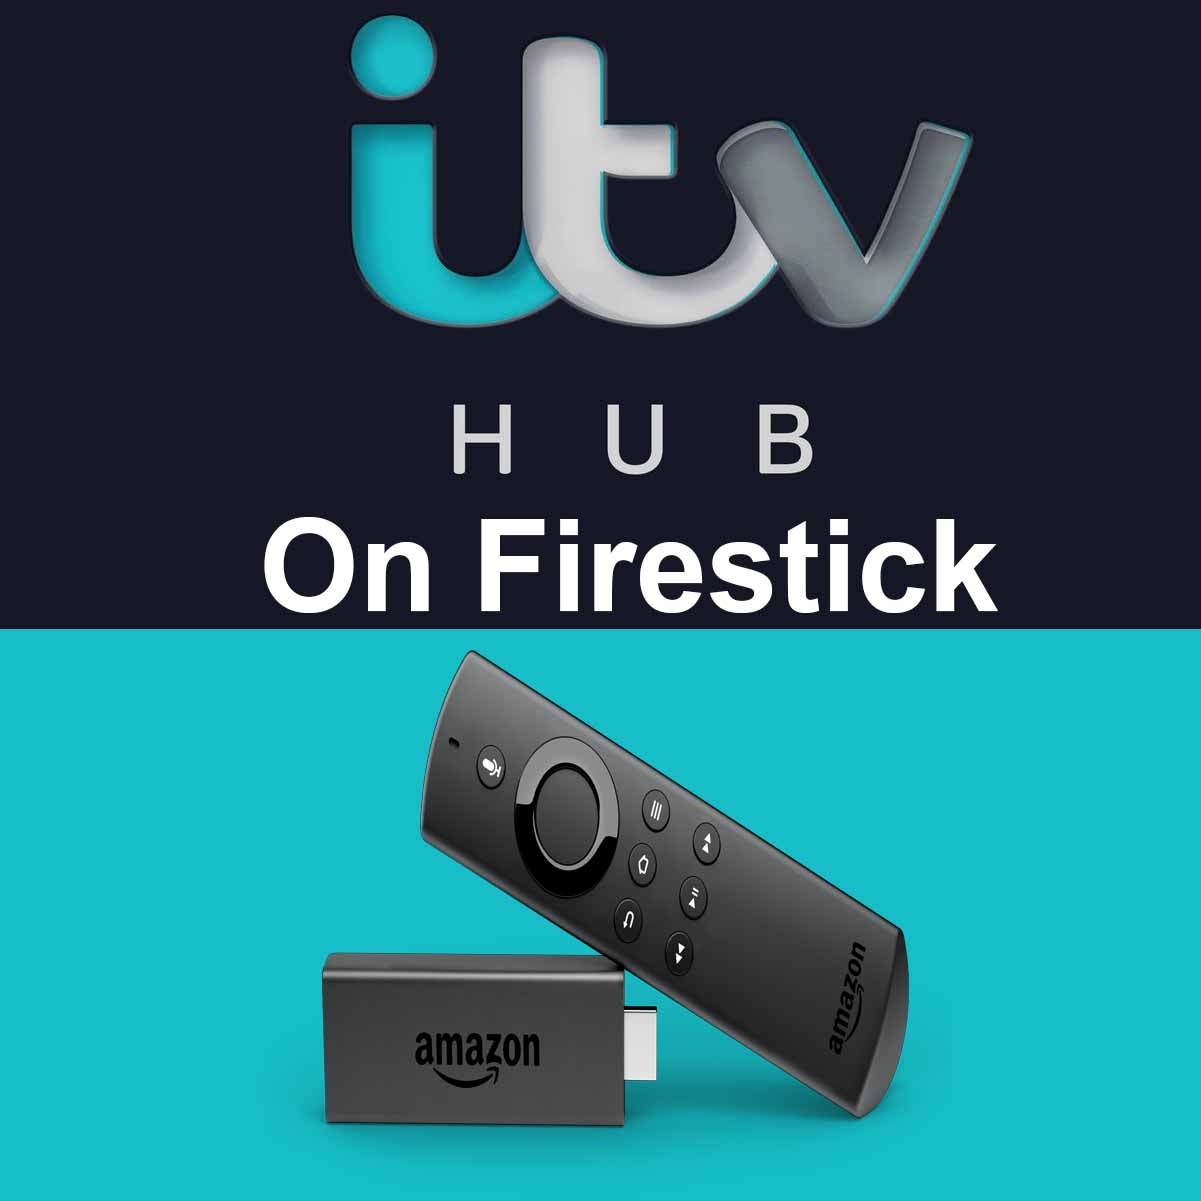 How To Install Itv Hub On Firestick June 2021 Updated